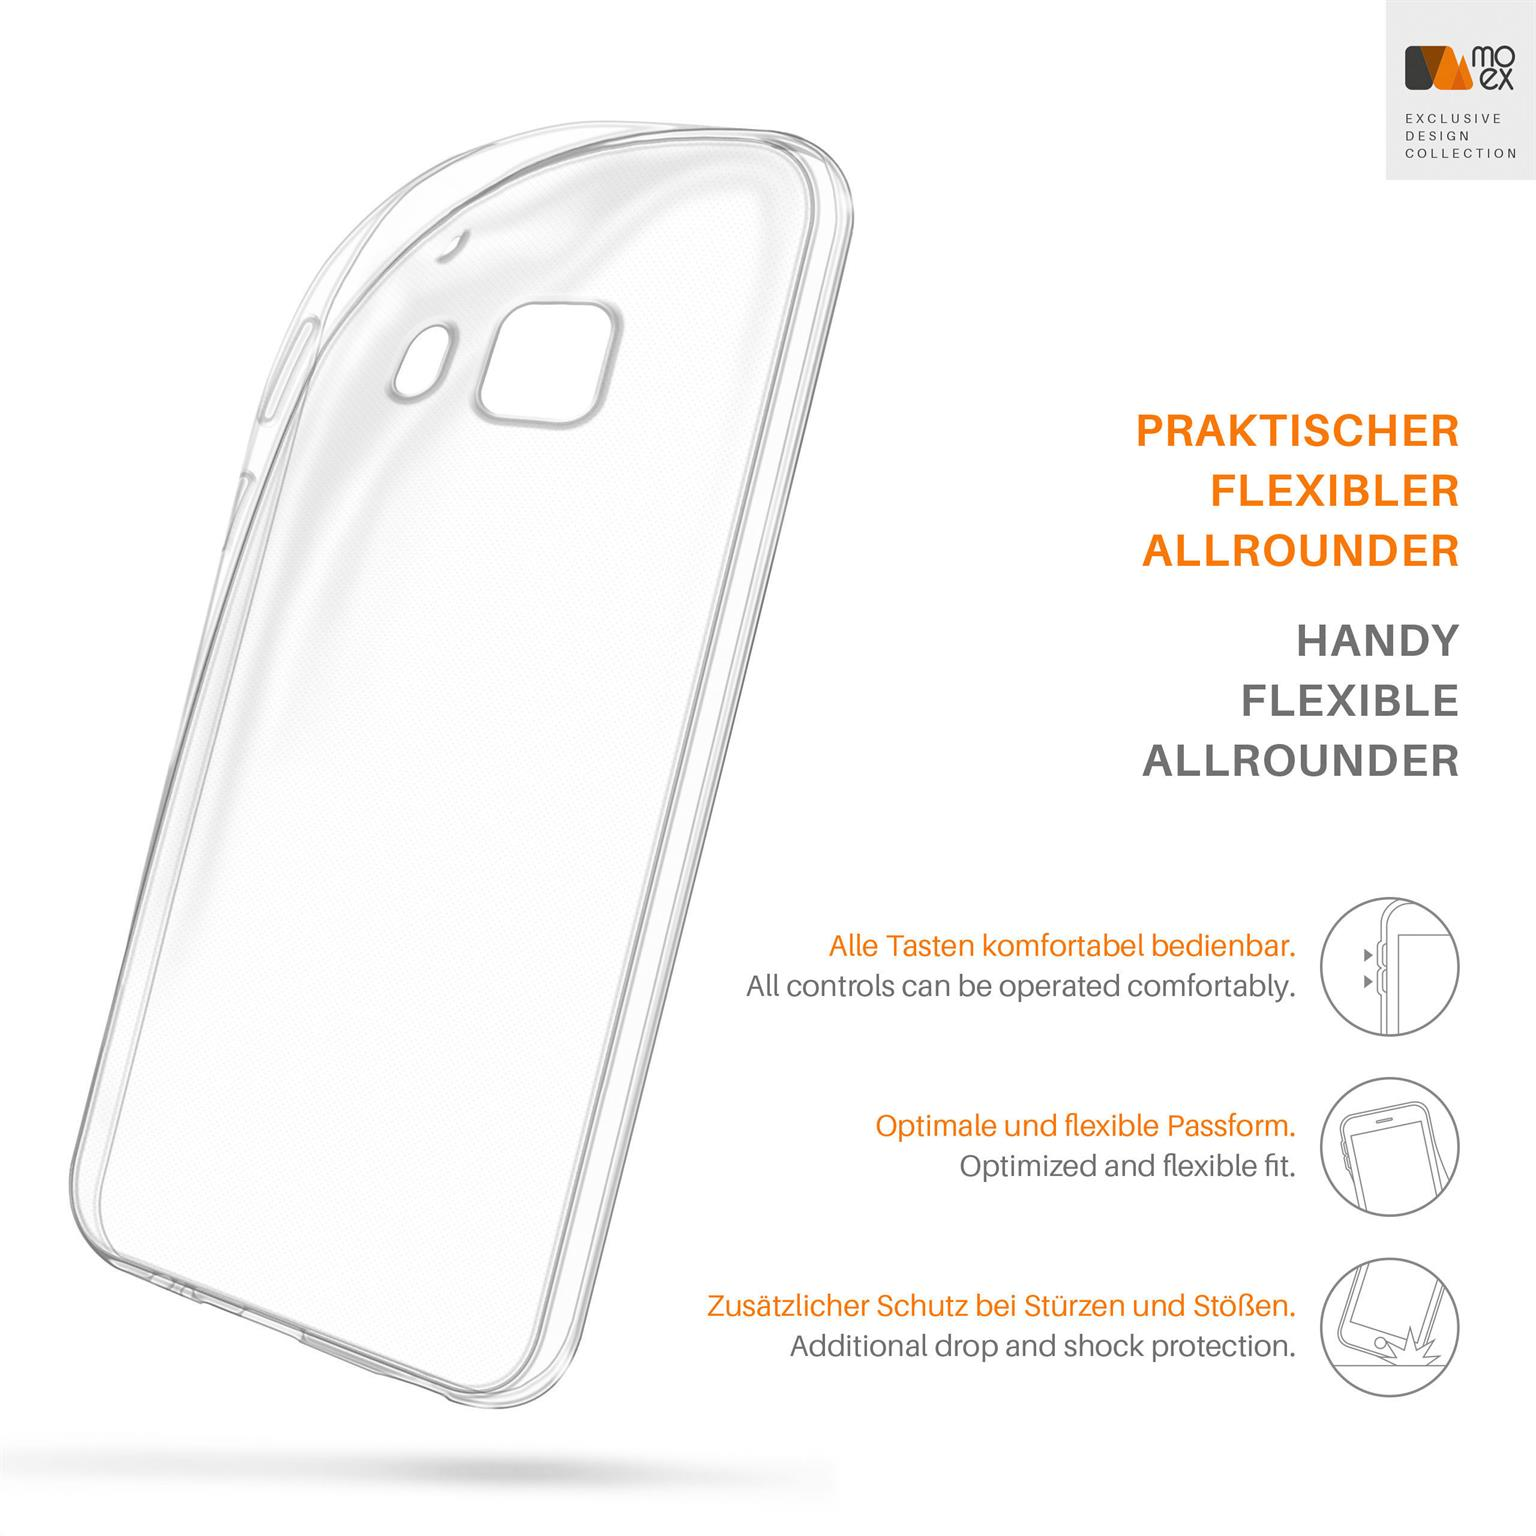 MOEX Aero Case, Backcover, HTC, Crystal-Clear S9, One